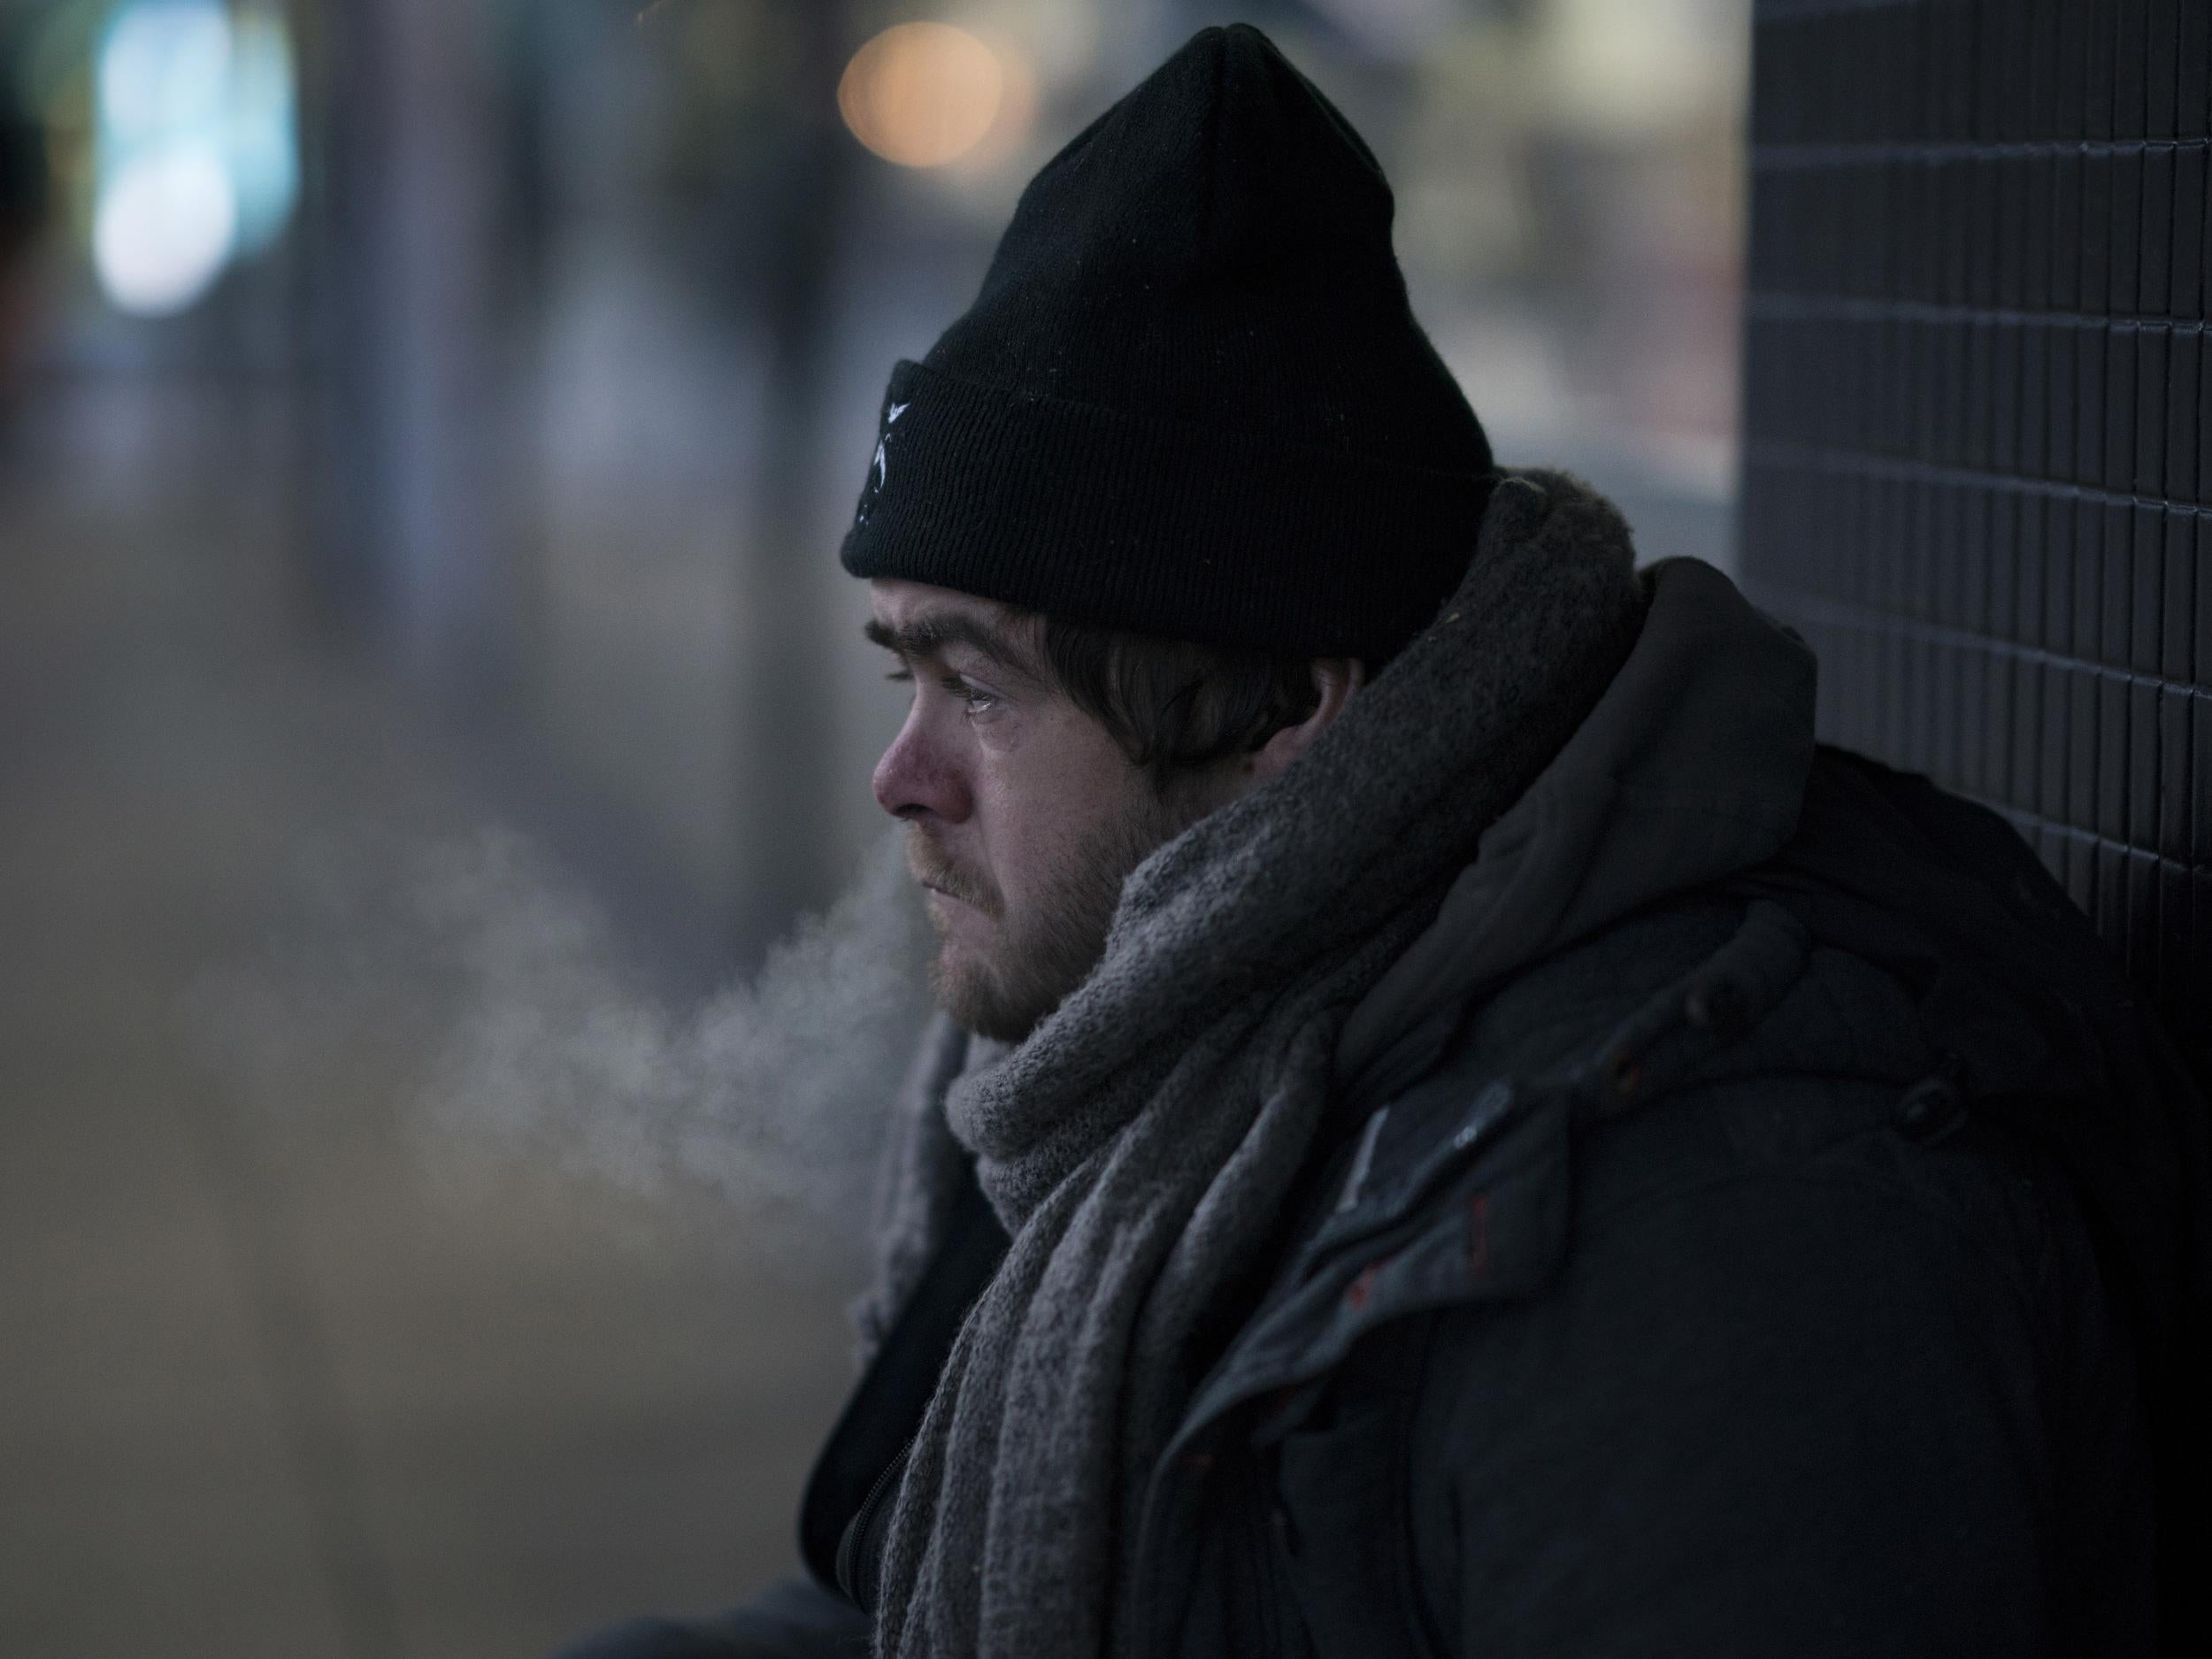 Last week, more than 8,000 people slept rough in freezing conditions to raise money to tackle homelessness